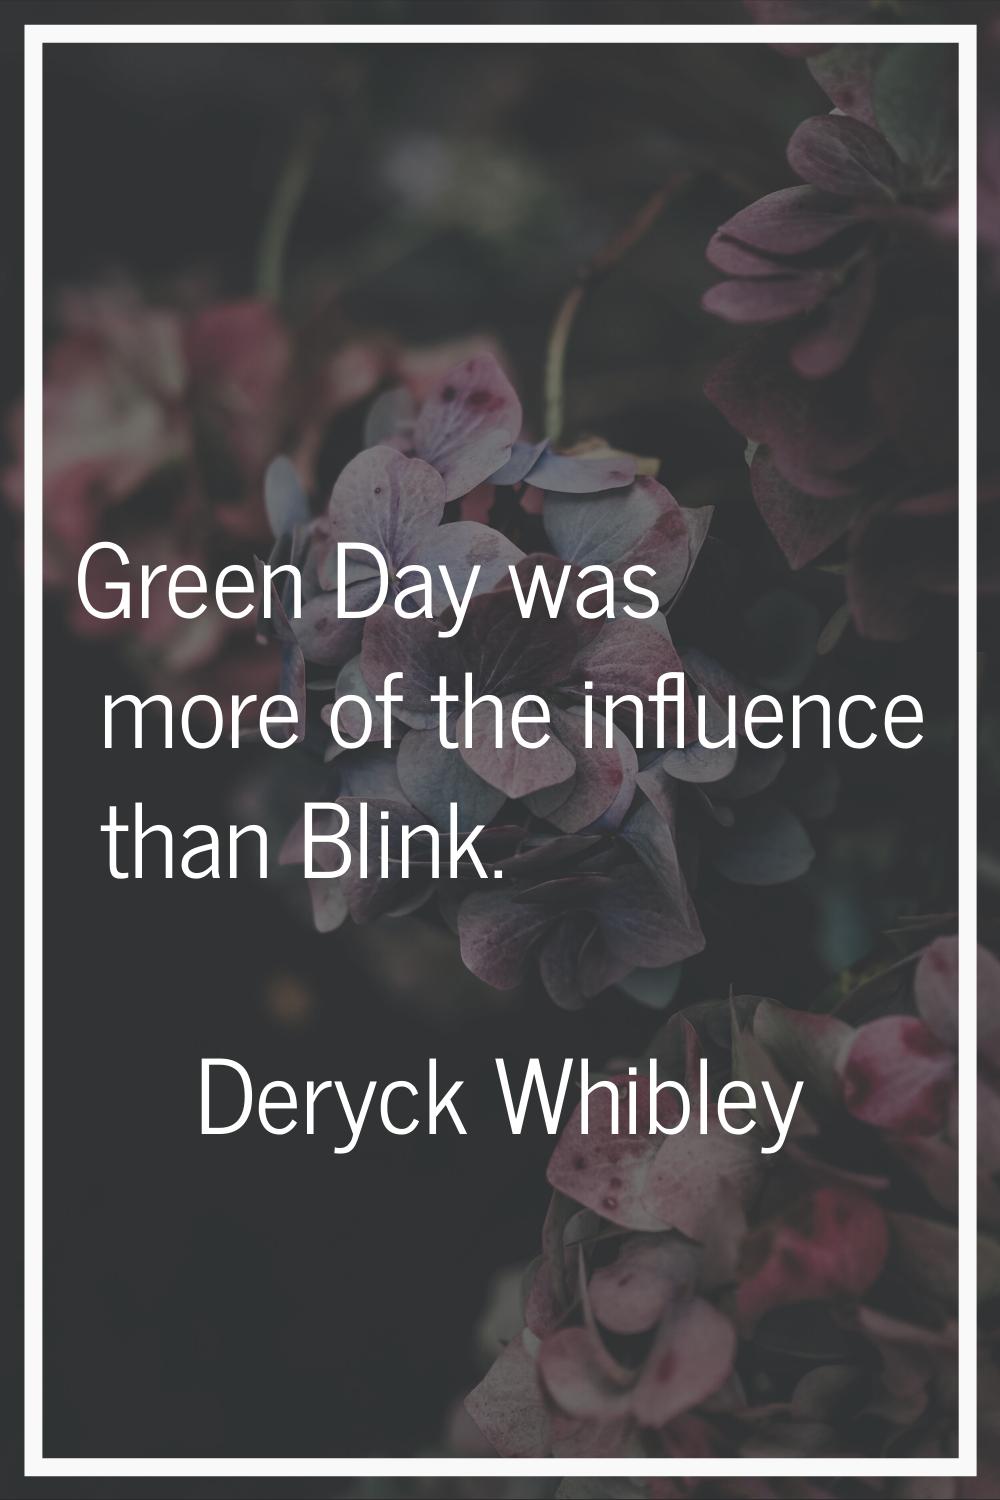 Green Day was more of the influence than Blink.